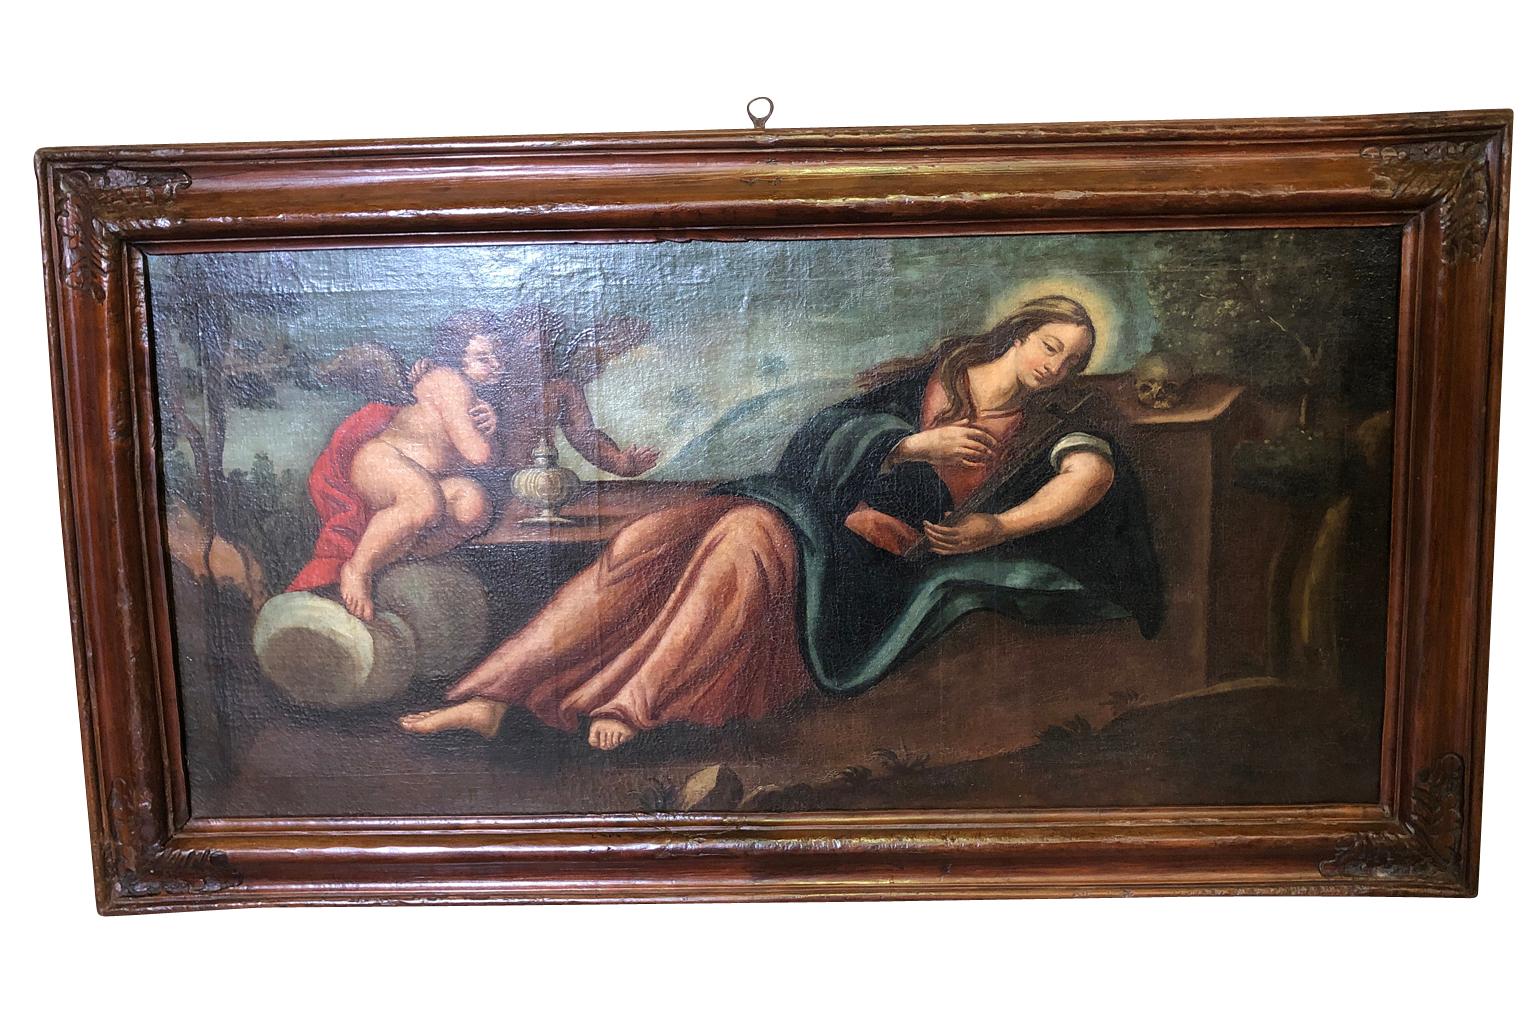 A breathtaking 18th century Spanish oil on canvas painting of Mary Magdalene - Madeleine - in is original frame. Beautiful detail.